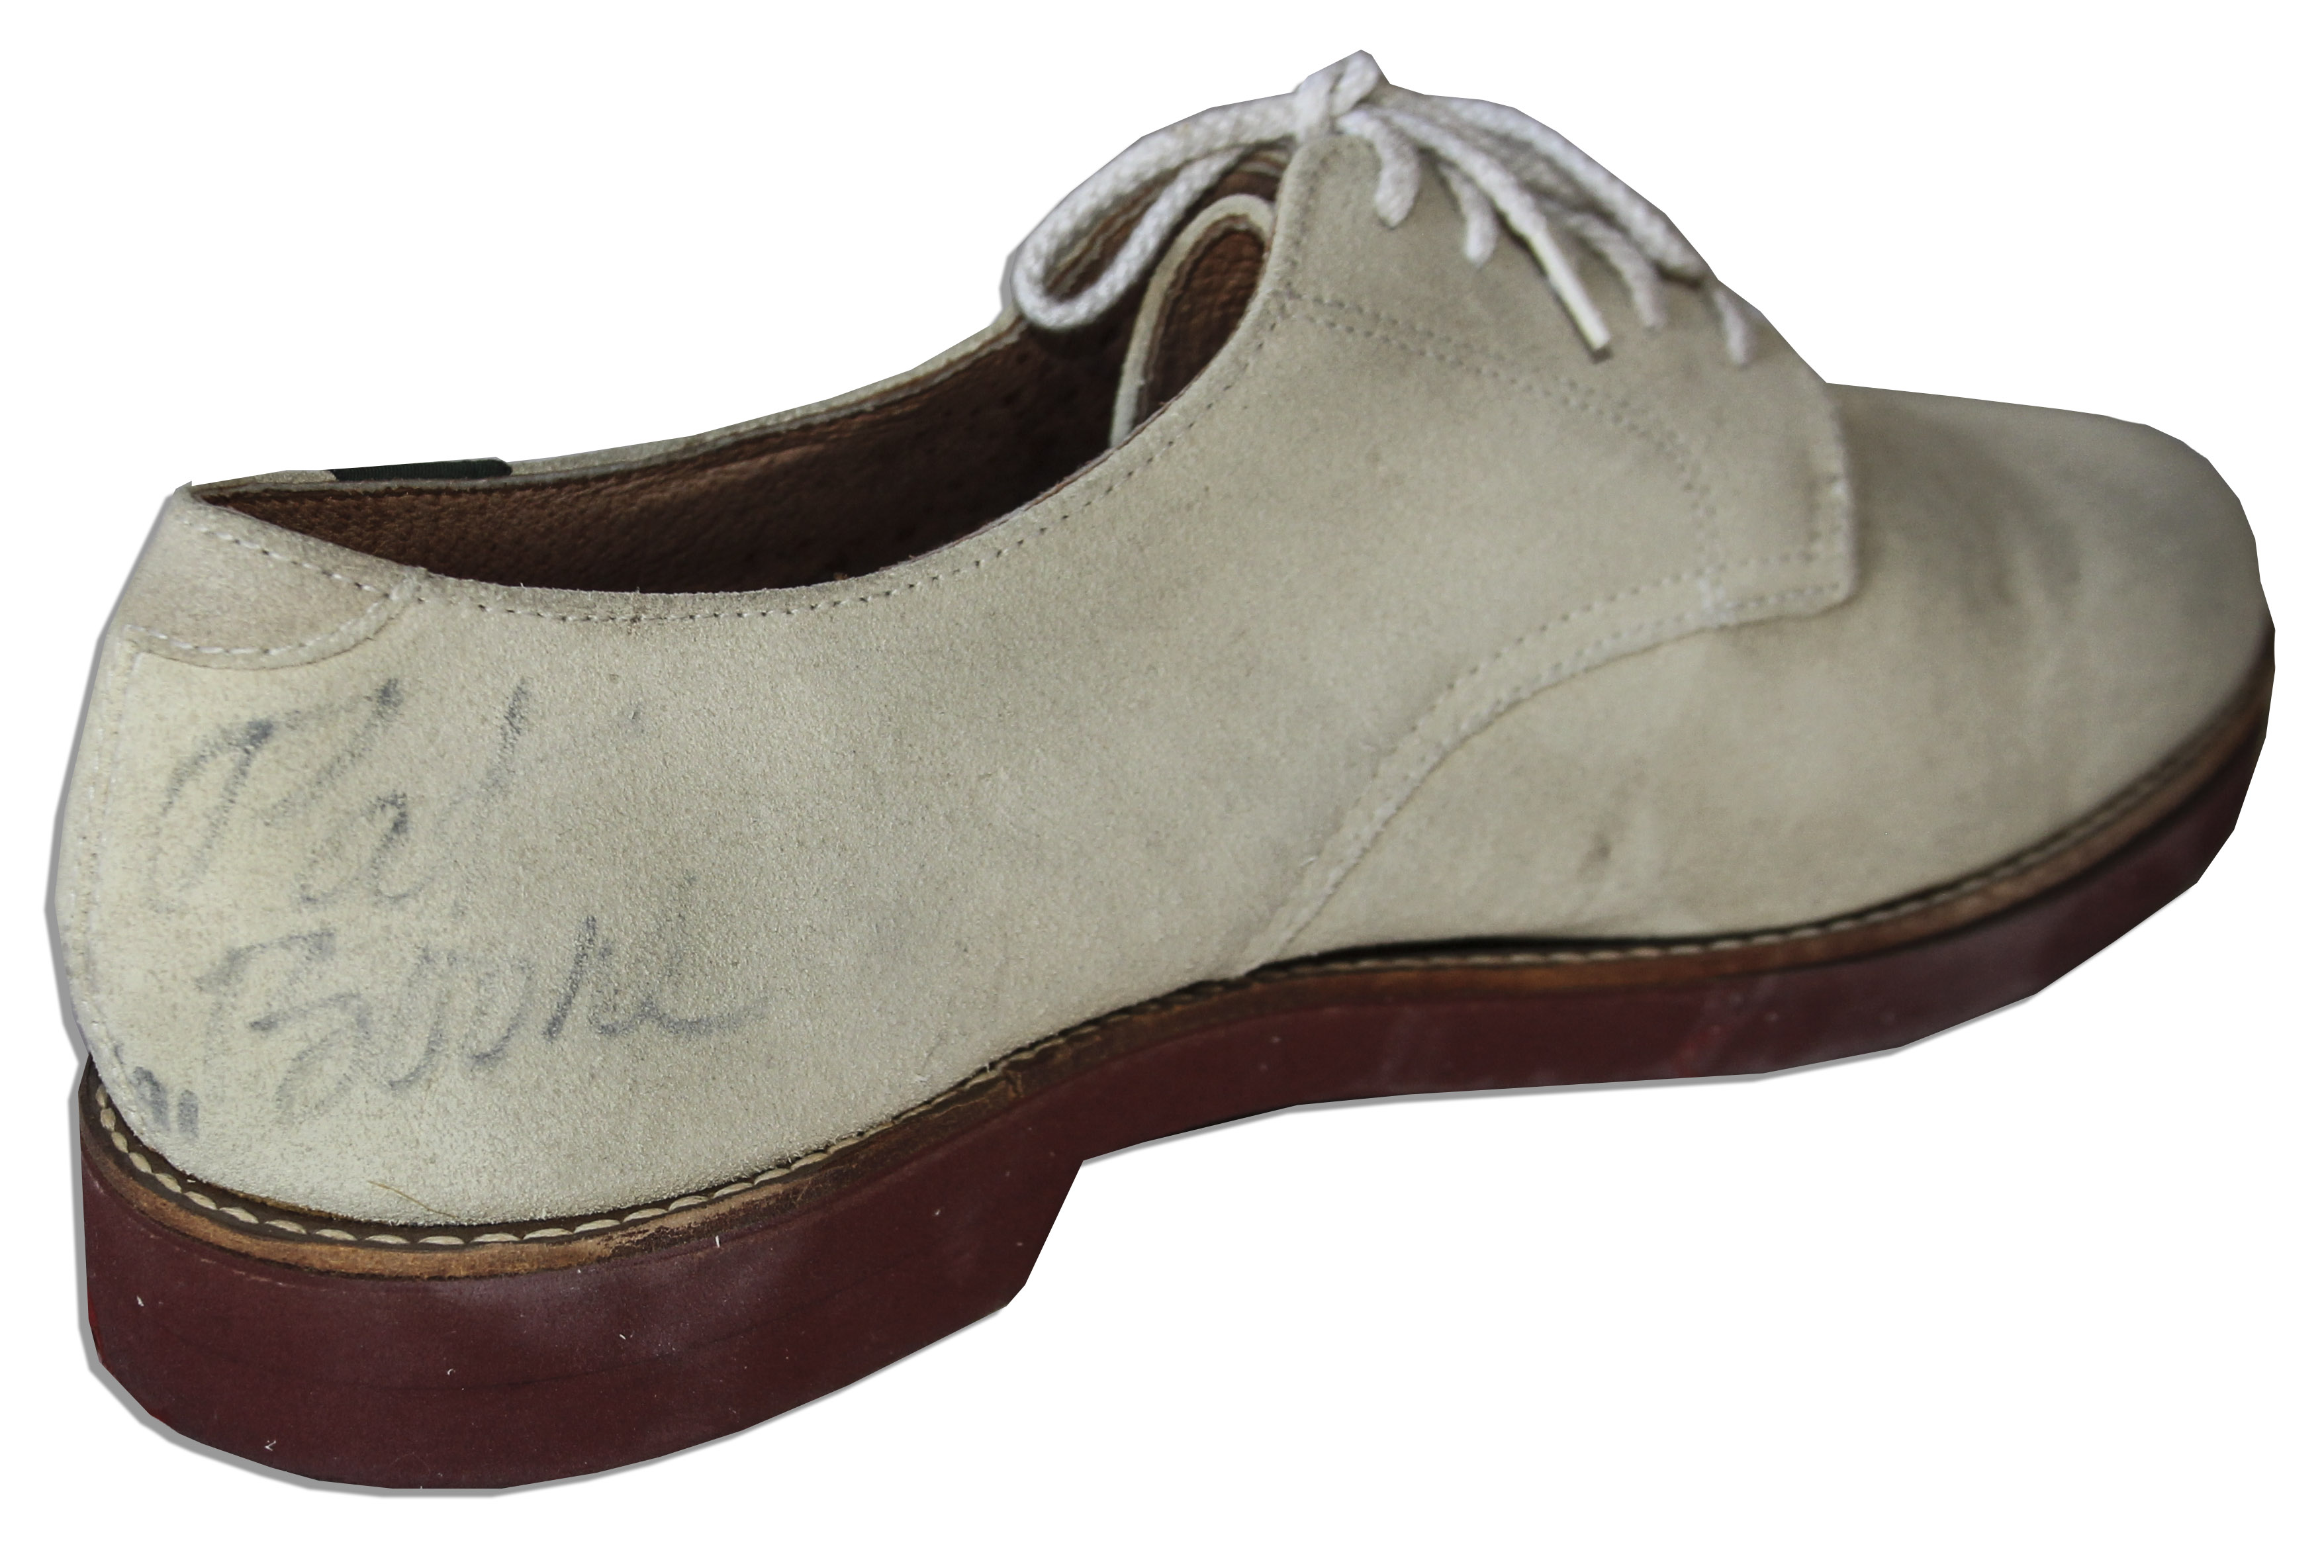 Pat Boone Signed White Shoes -- Signed 